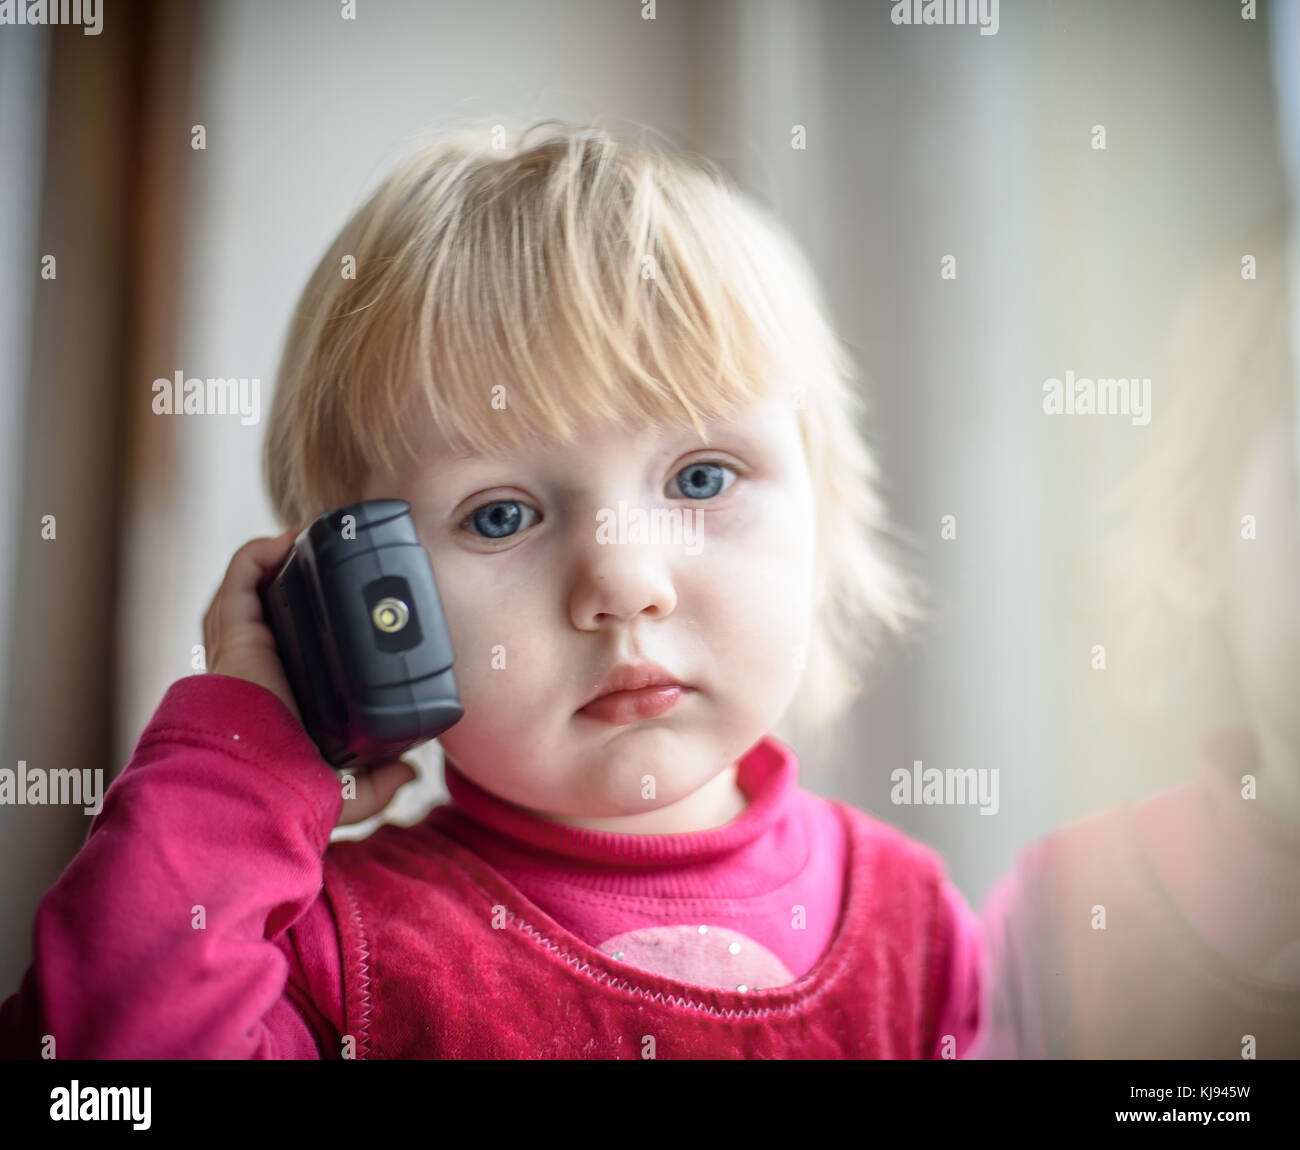 little girl in a red dress talking on the phone Stock Photo